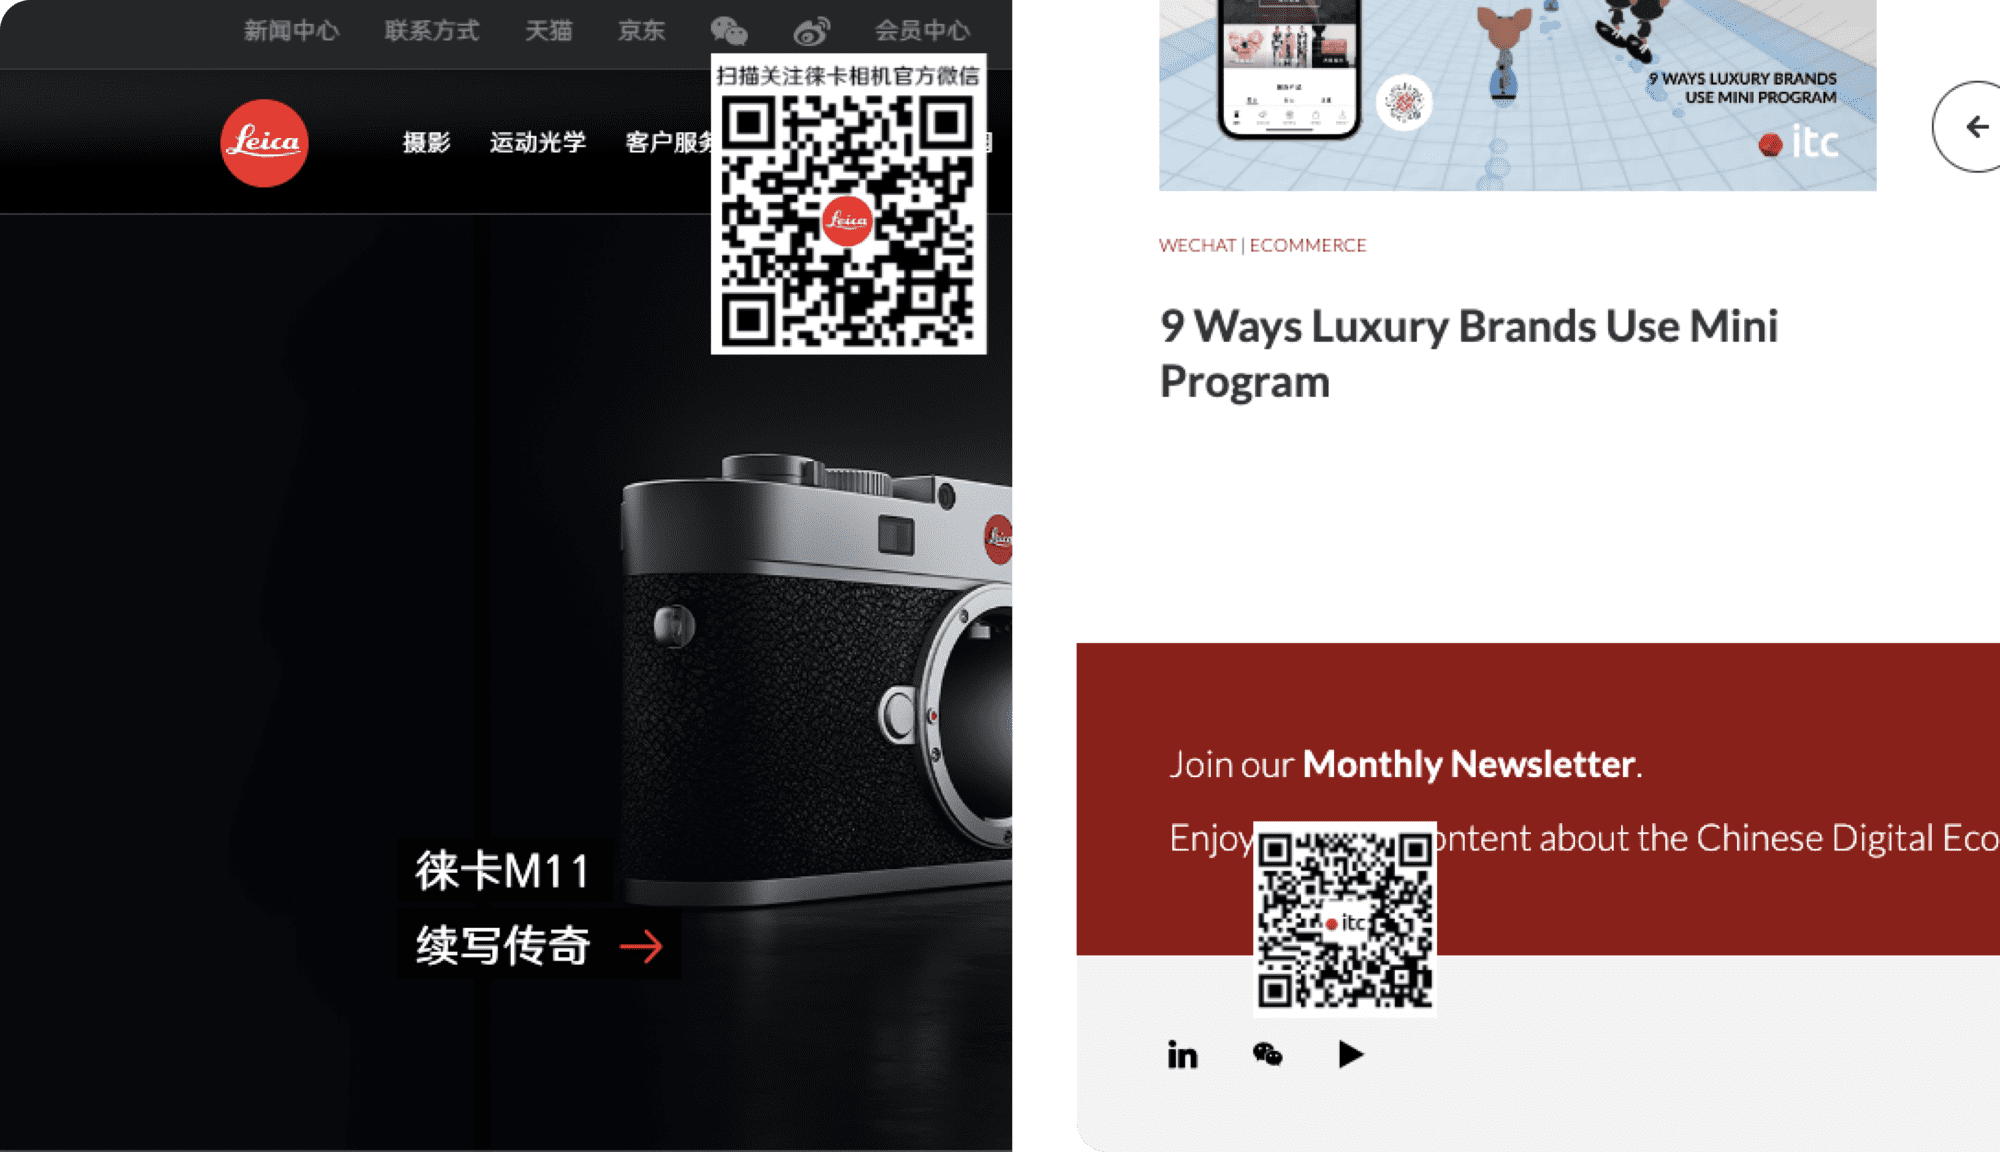 The WeChat QR codes of Leica (on the left) and IT Consultis (on the right)